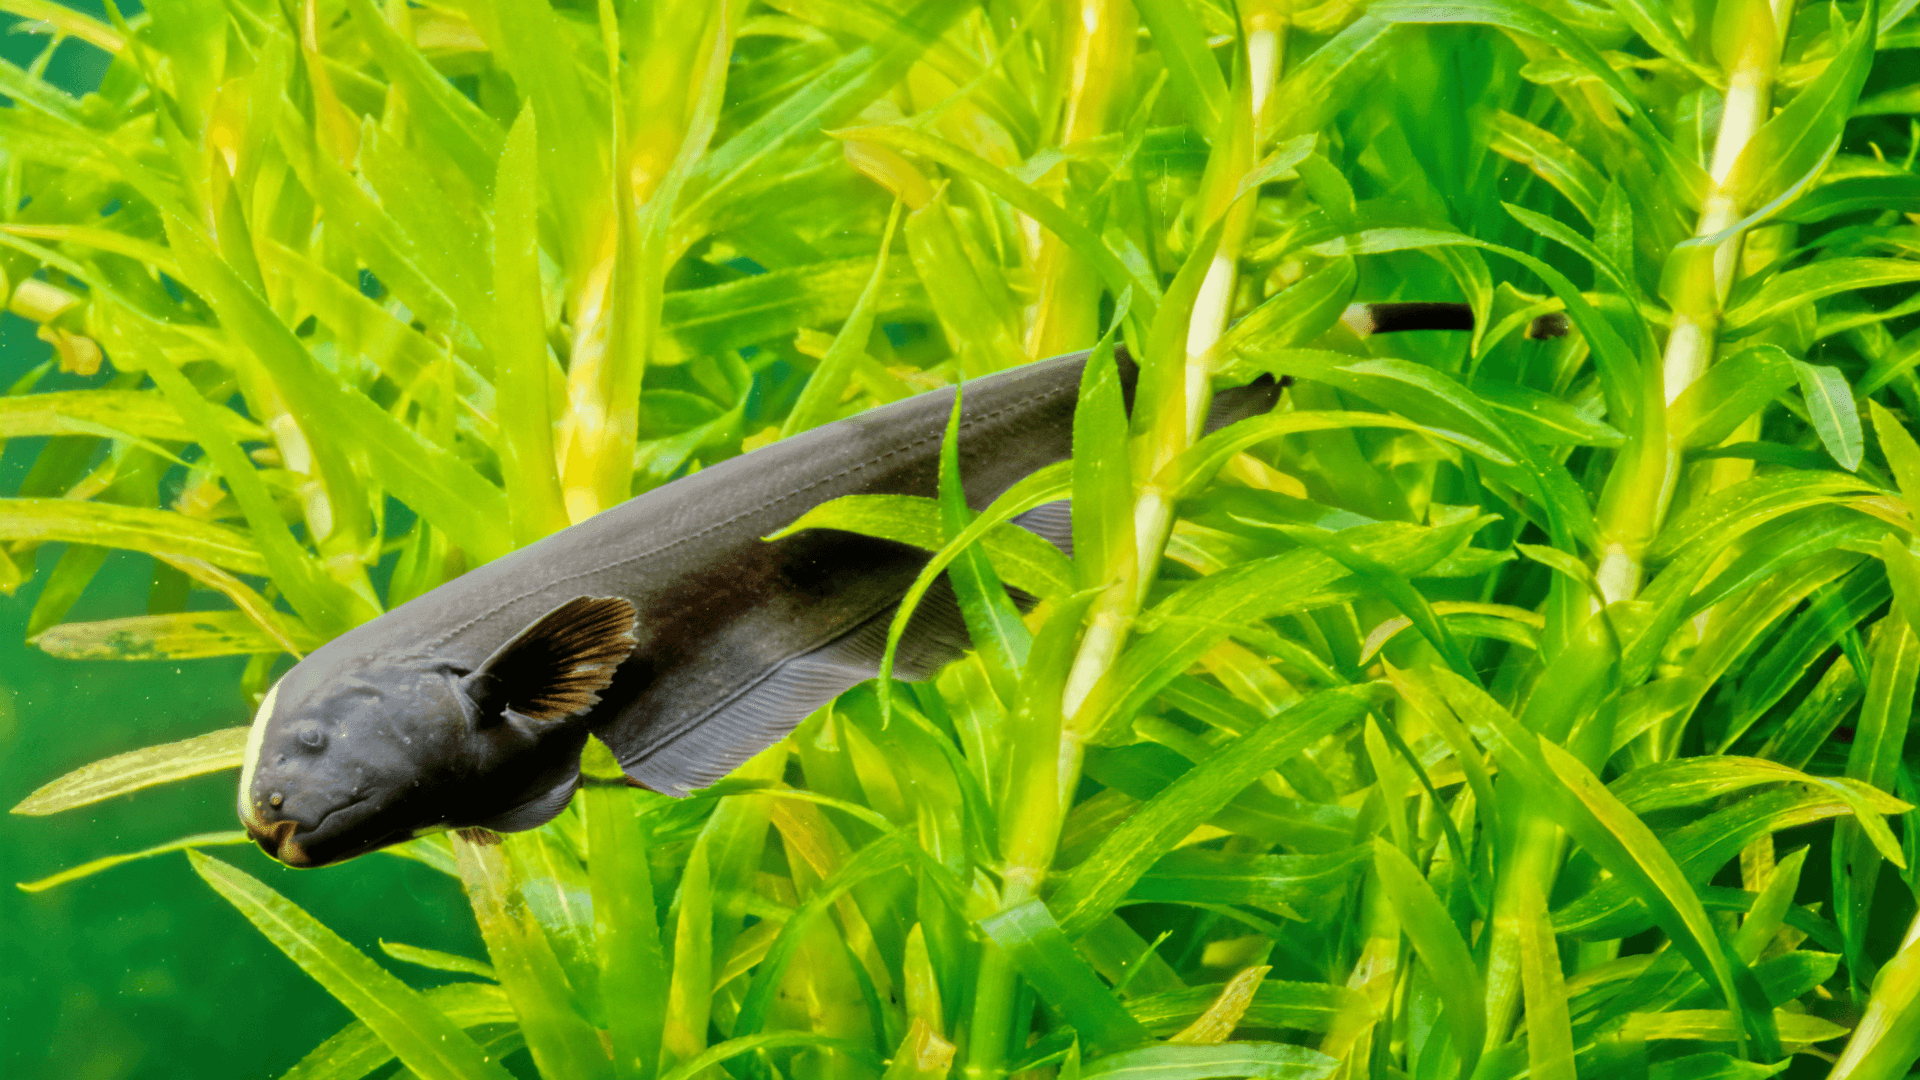 A photo of Black ghost knifefish